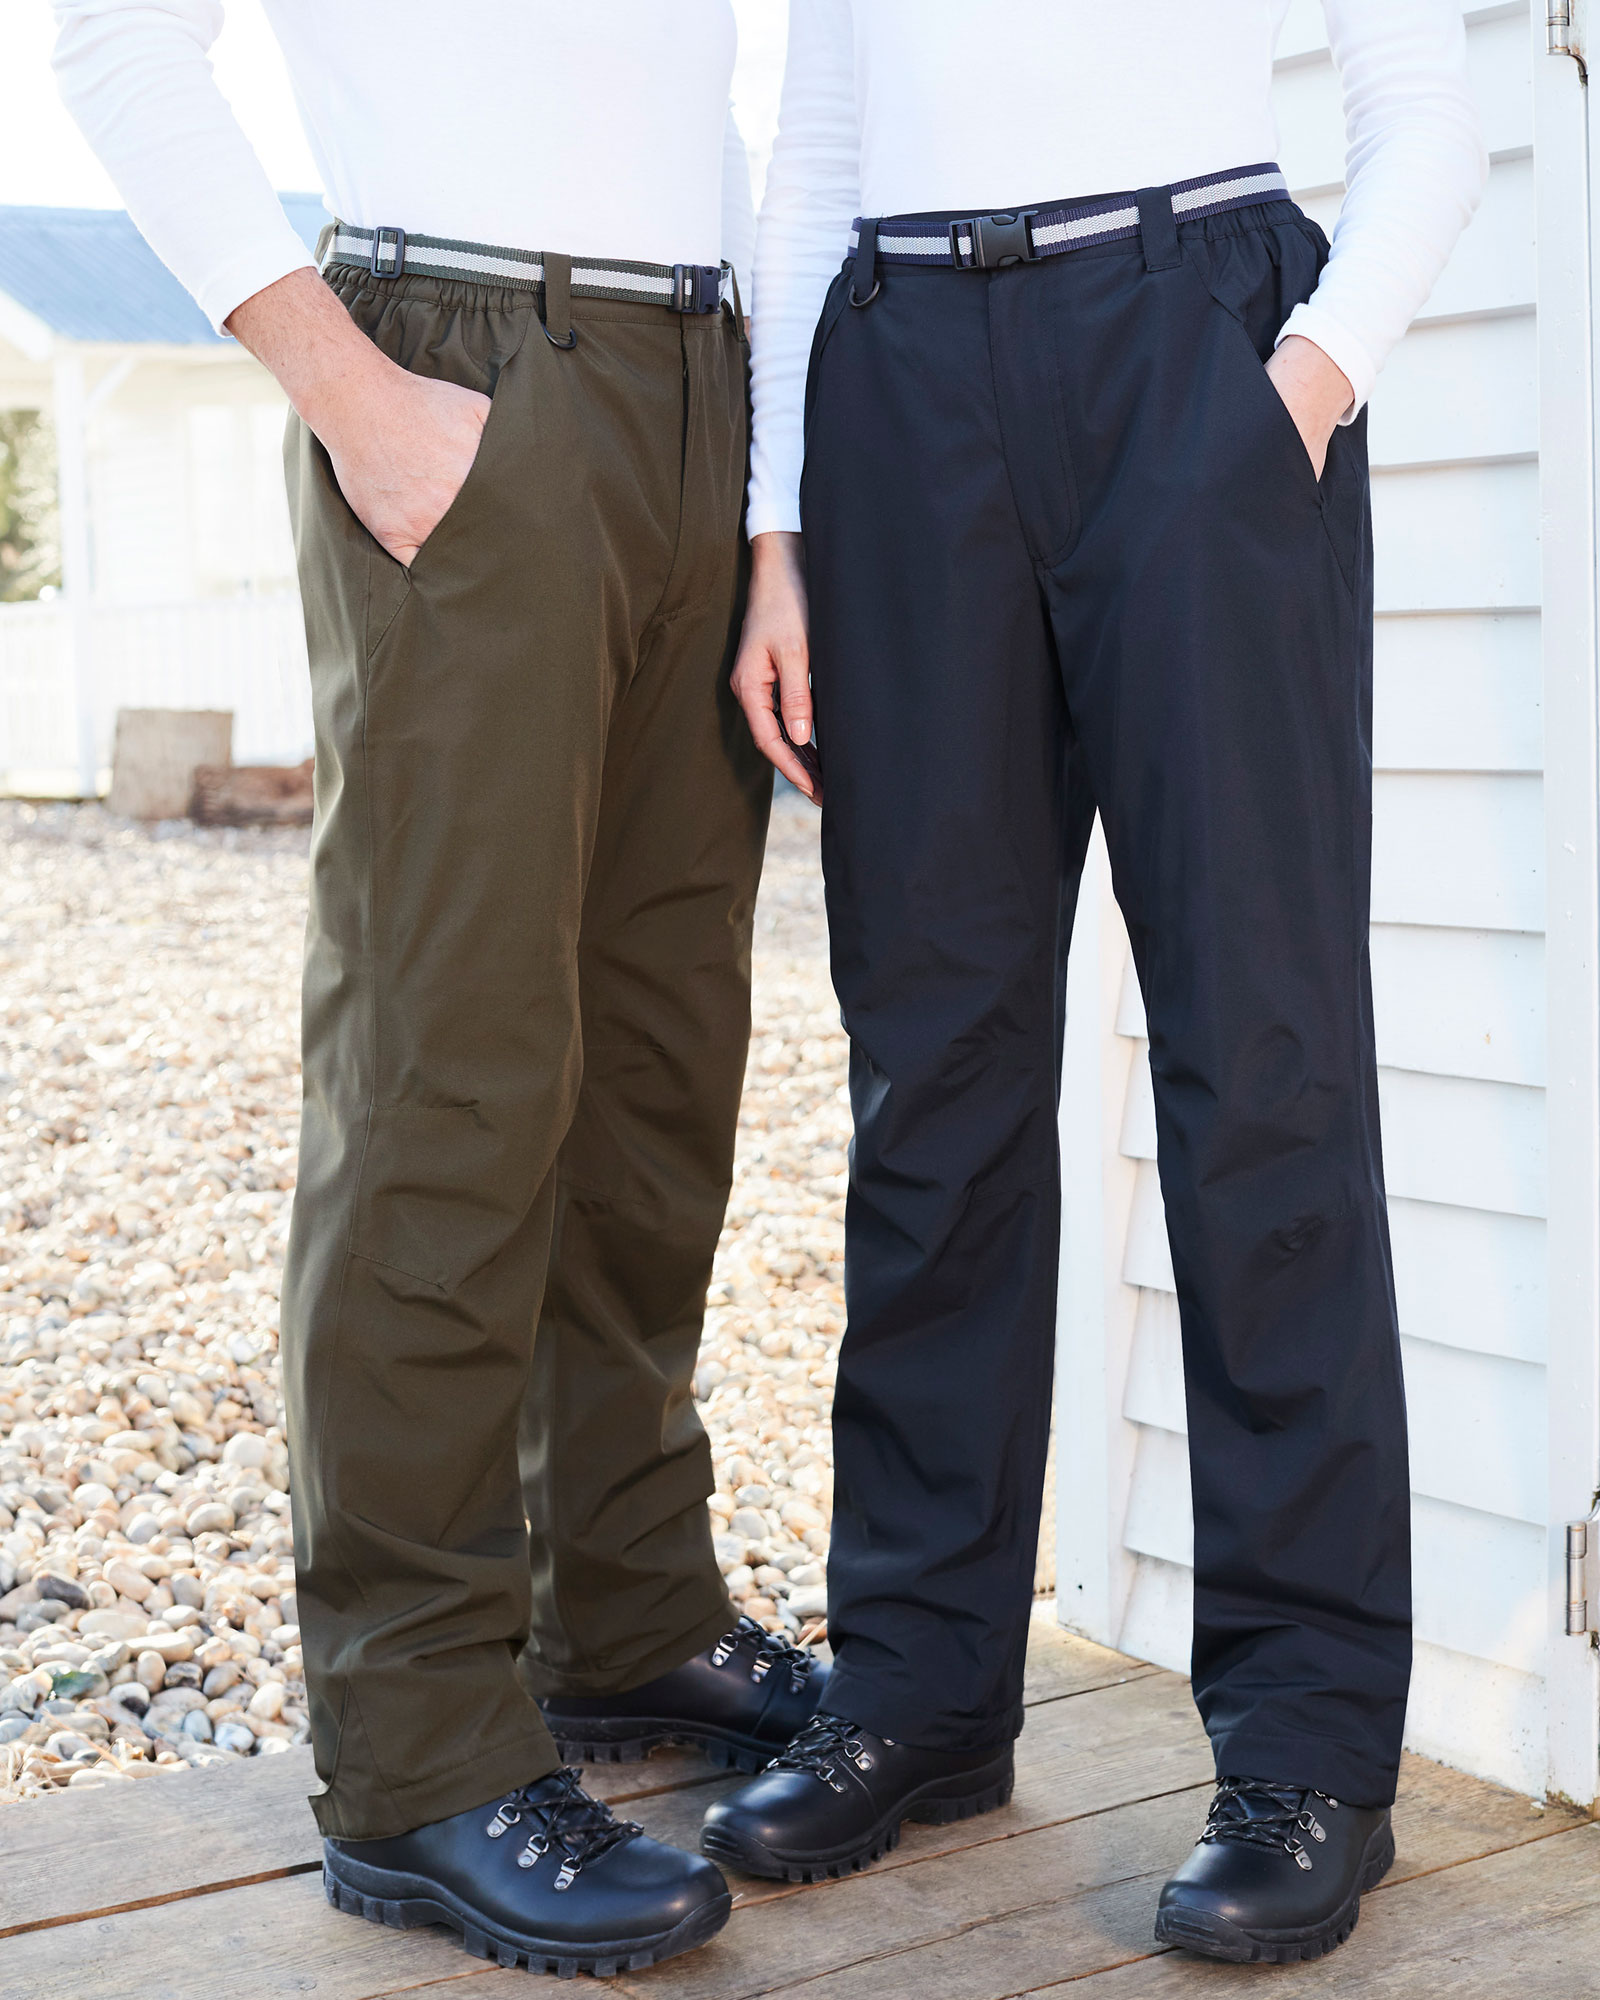 Craghoppers Kiwi Pro Stretch Hiking Trouser Review Walkers Love Them